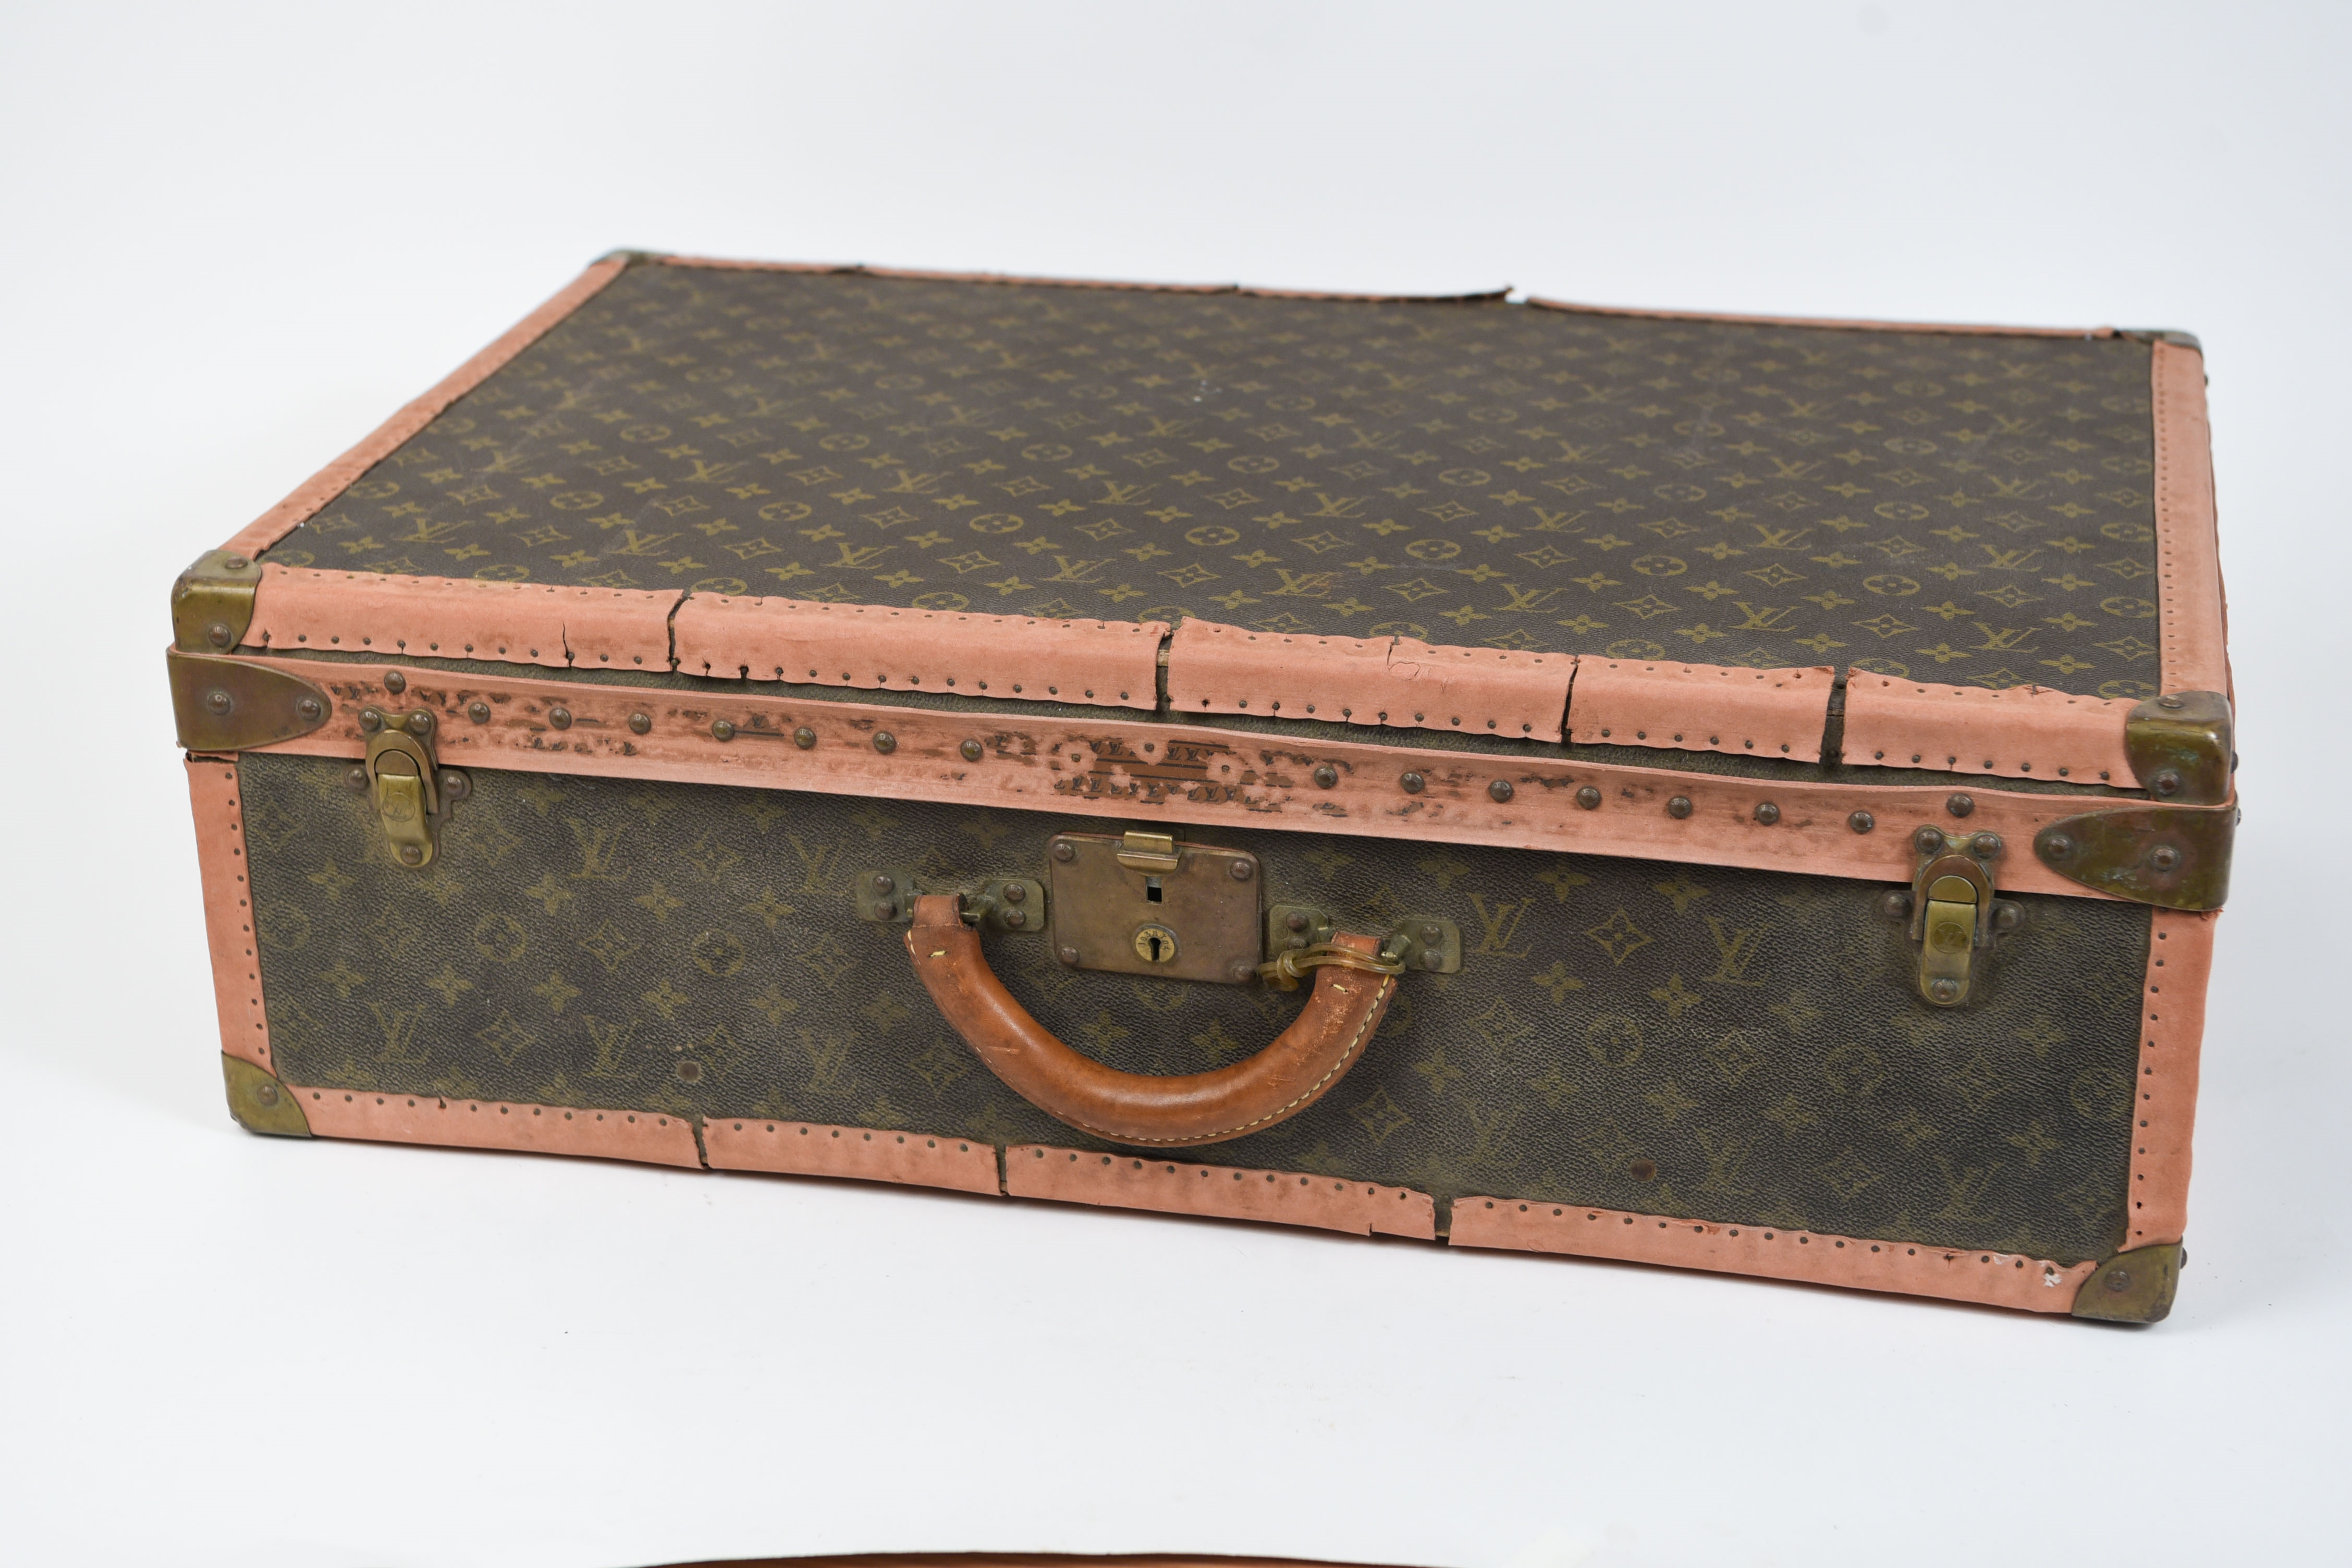 Louis Vuitton Alzer 75 Trunk Coffee Table